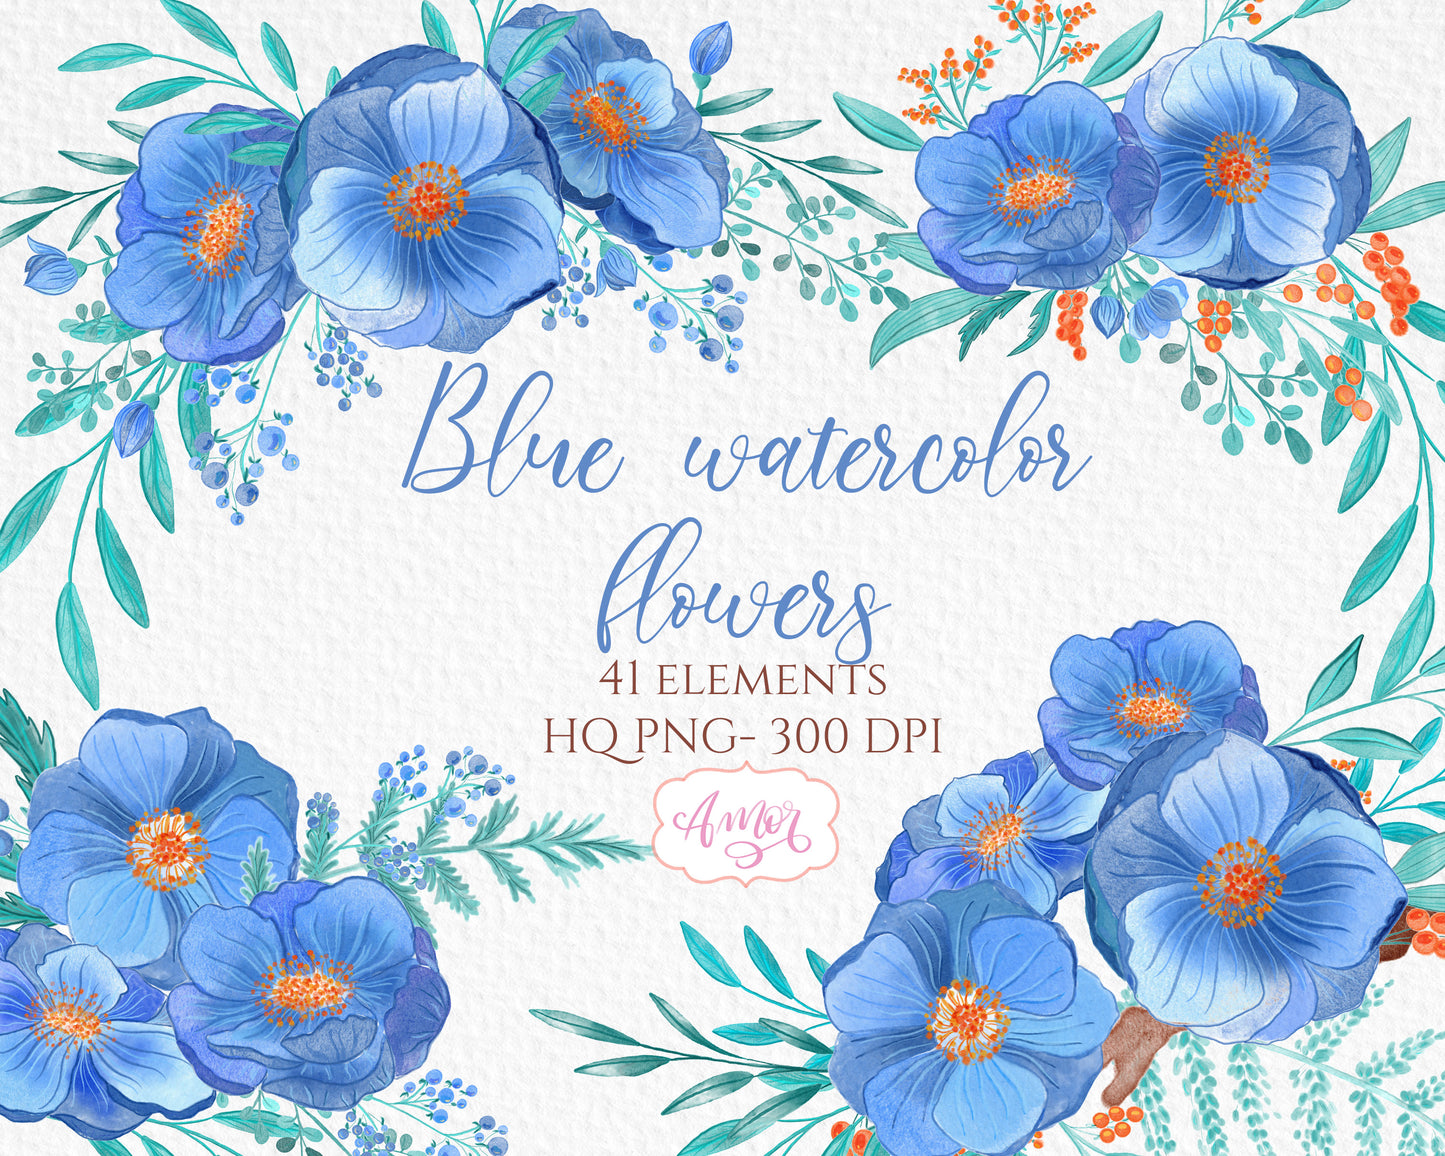 Watercolor Blue Floral clipart for invitations